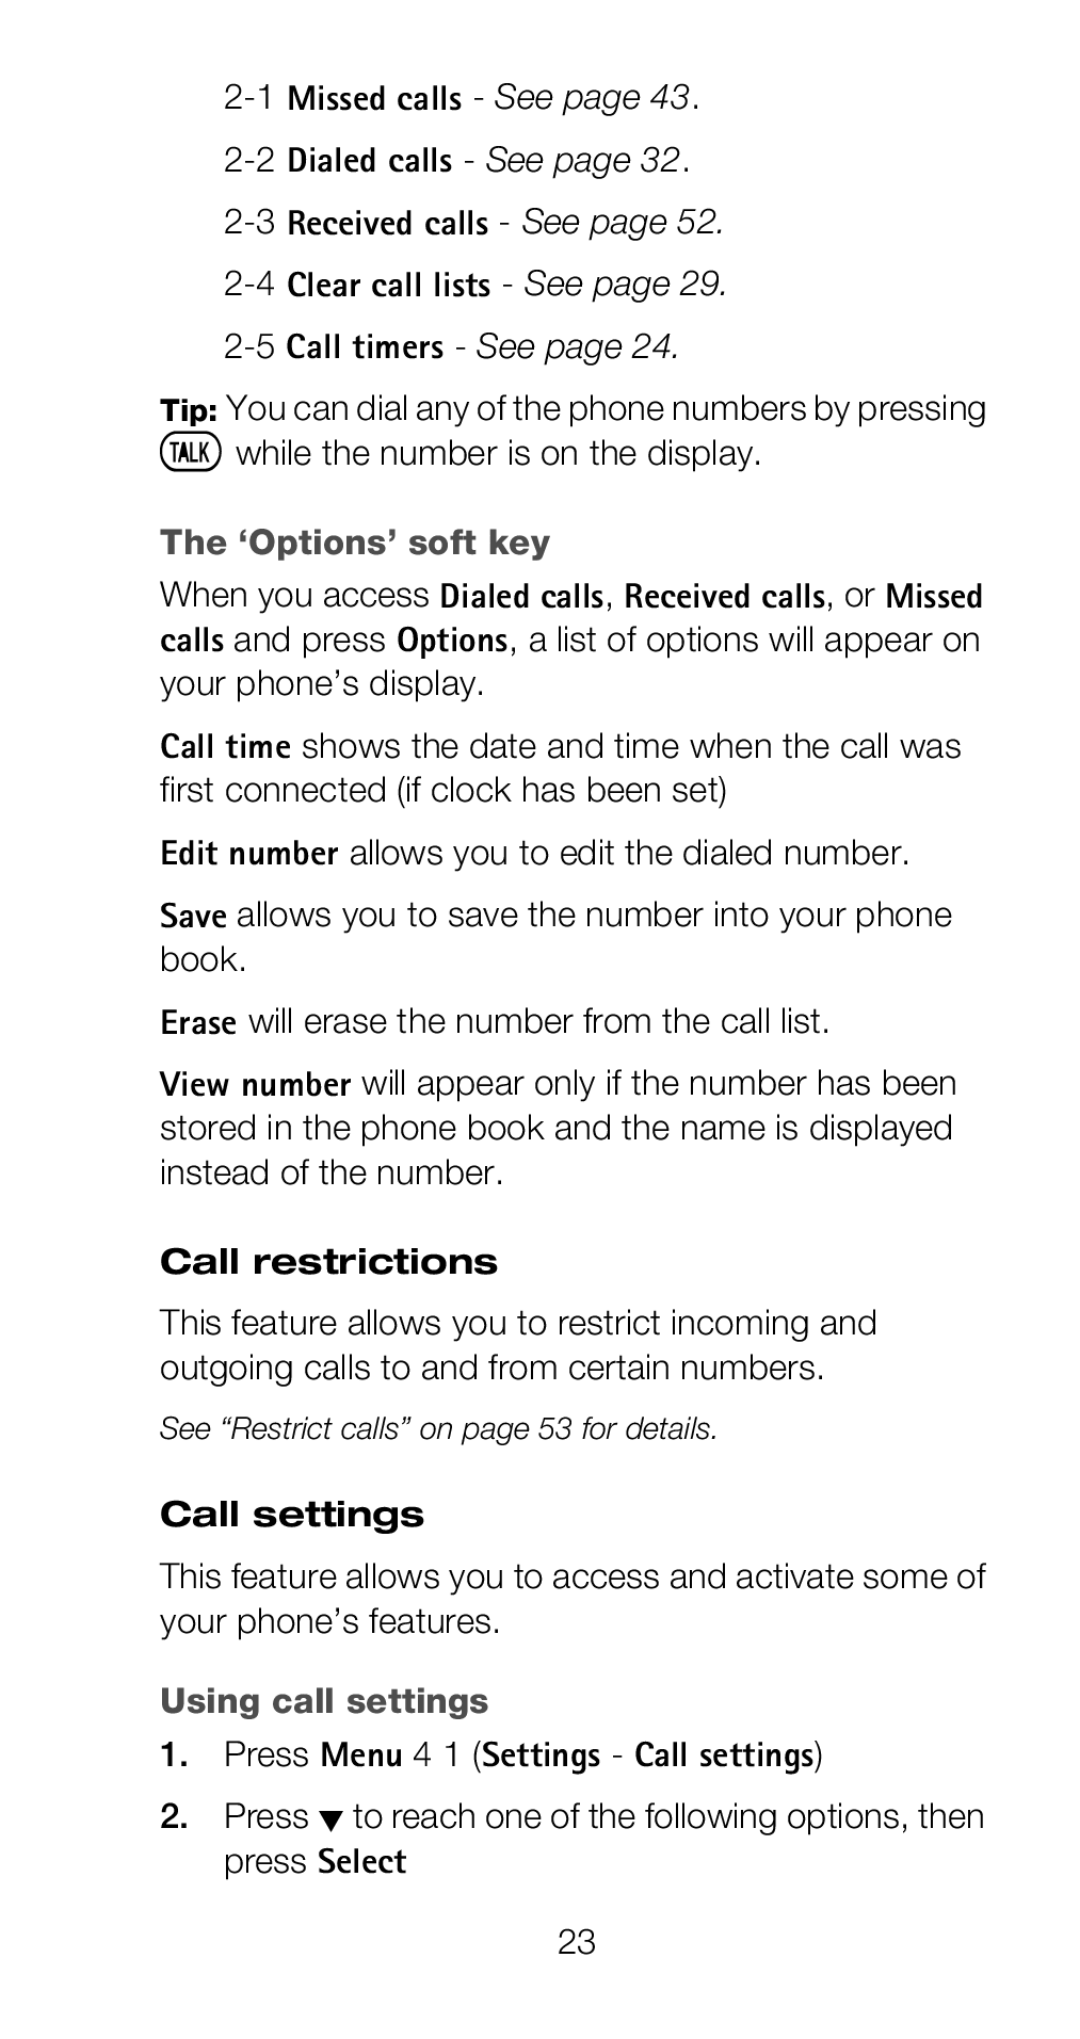 Nokia 6160 manual Ówhile the number is on the display, ‘Options’ soft key, Call restrictions, Using call settings 